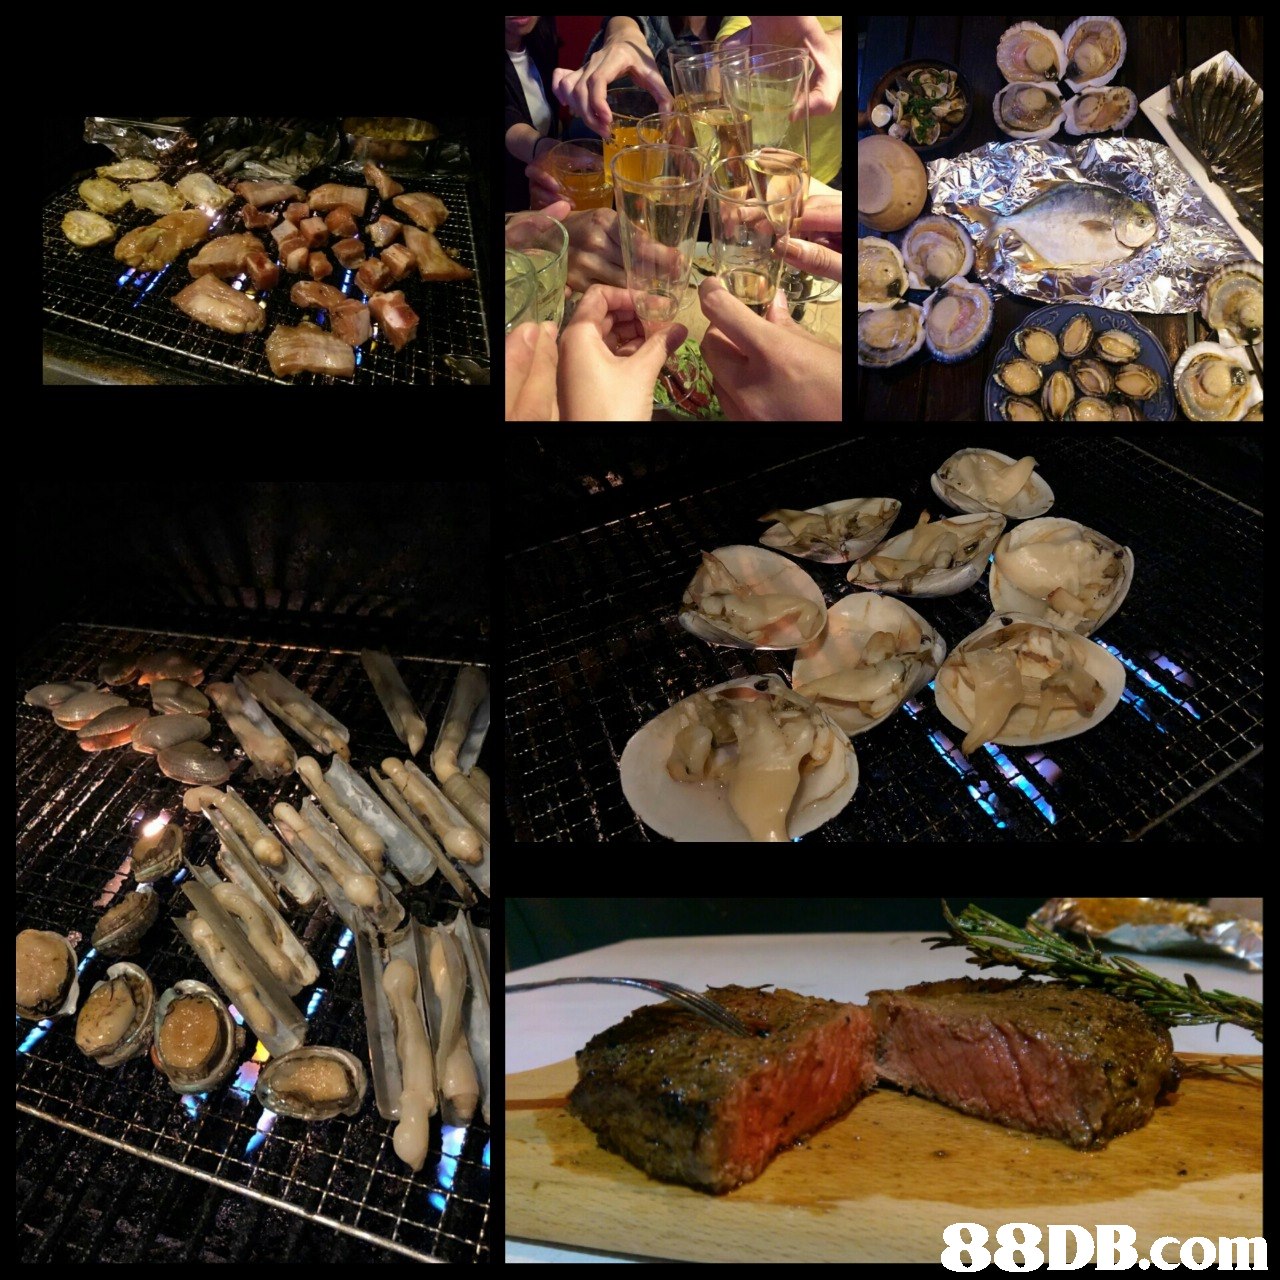   food,grilling,cuisine,meat,meal